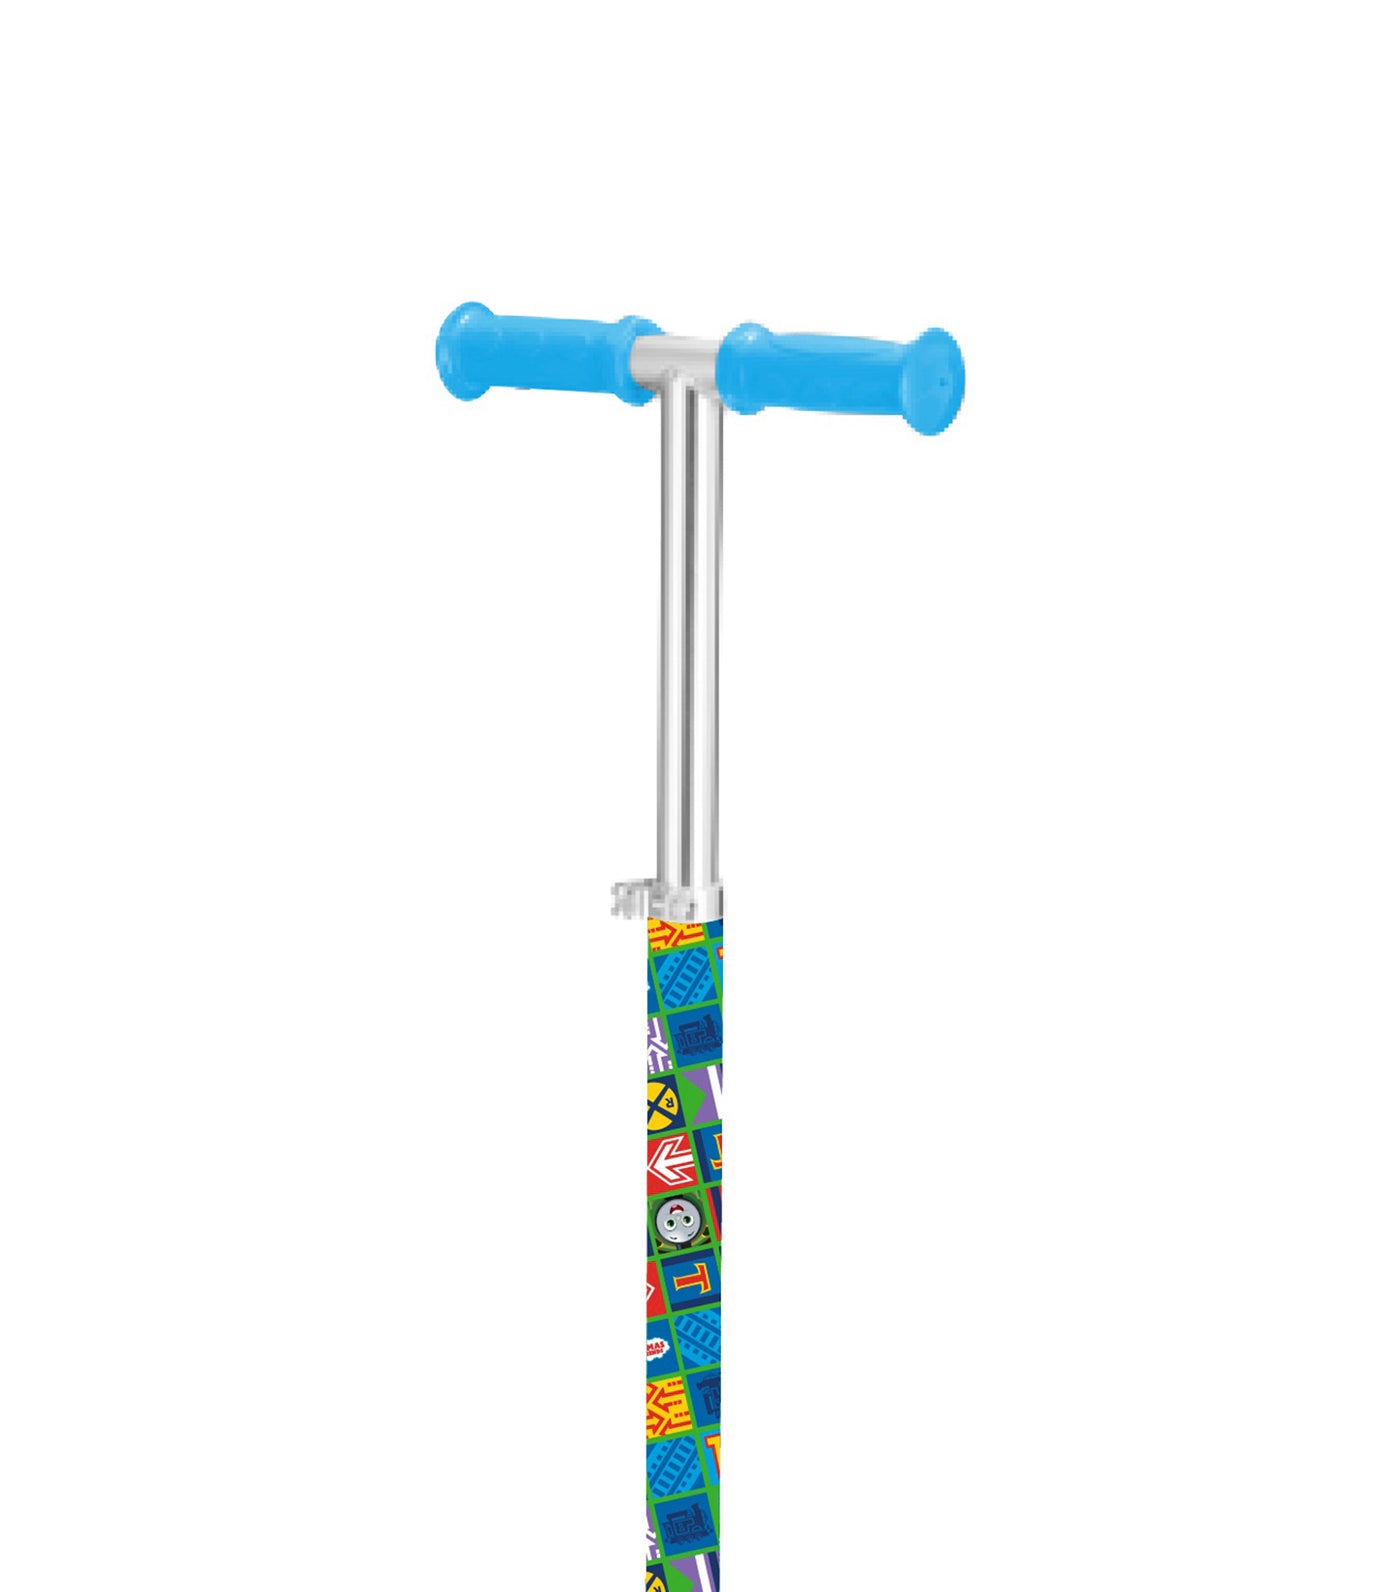 Thomas & Friends Twist and Roll Scooter - Blue